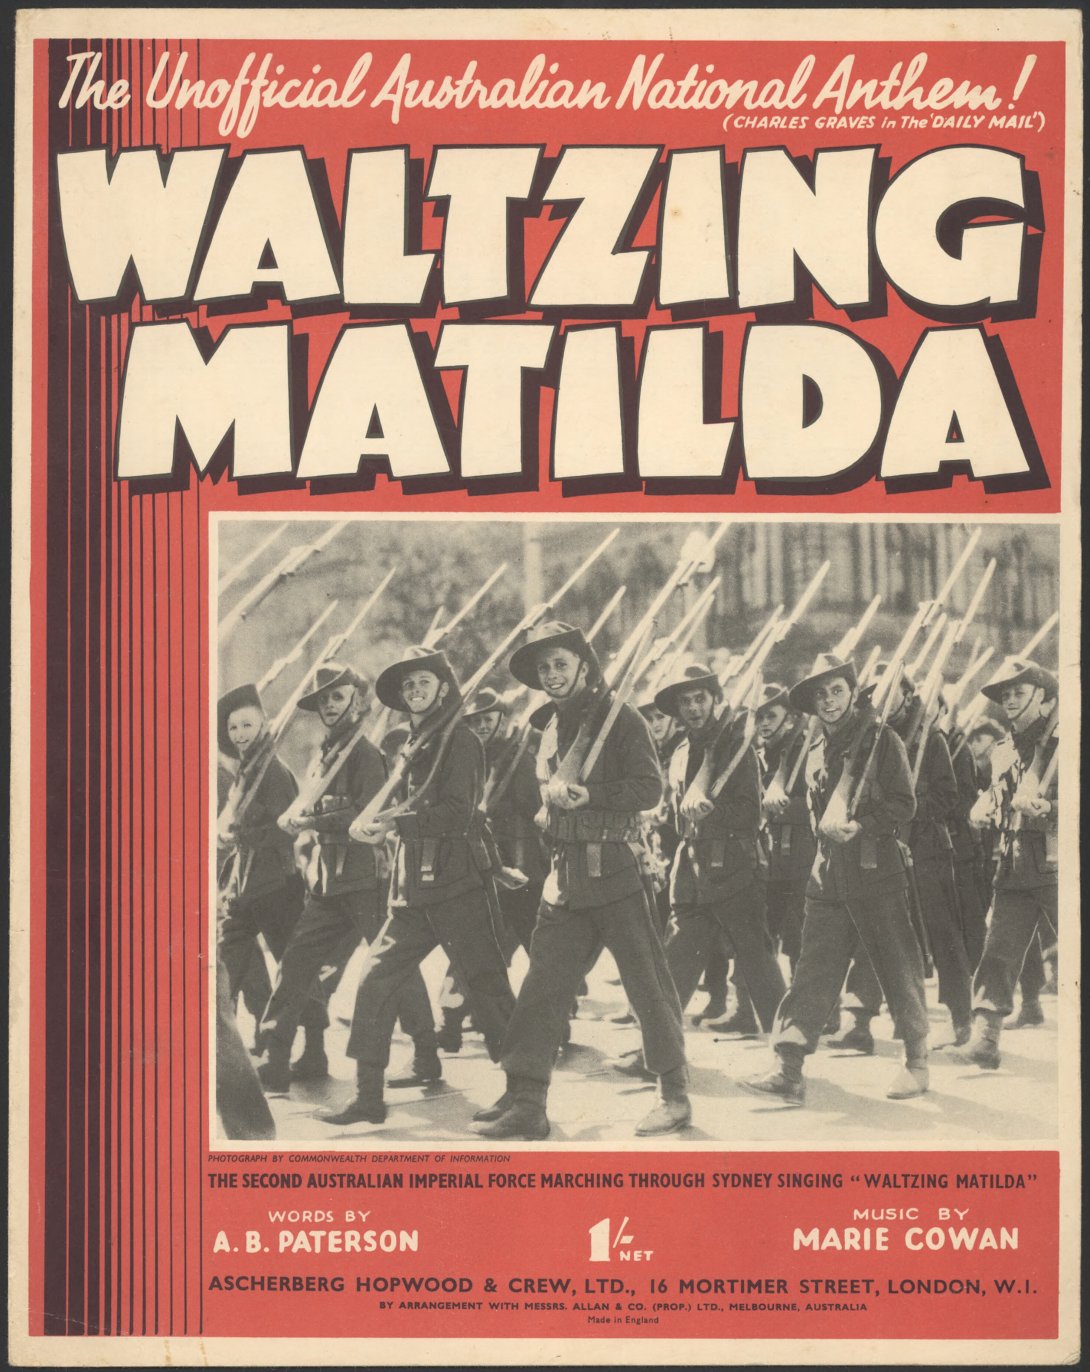 Front page of sheet music for song Waltzing Matilda. White text on a red background above the title reads "The Unoffficial Australian National Anthem!"